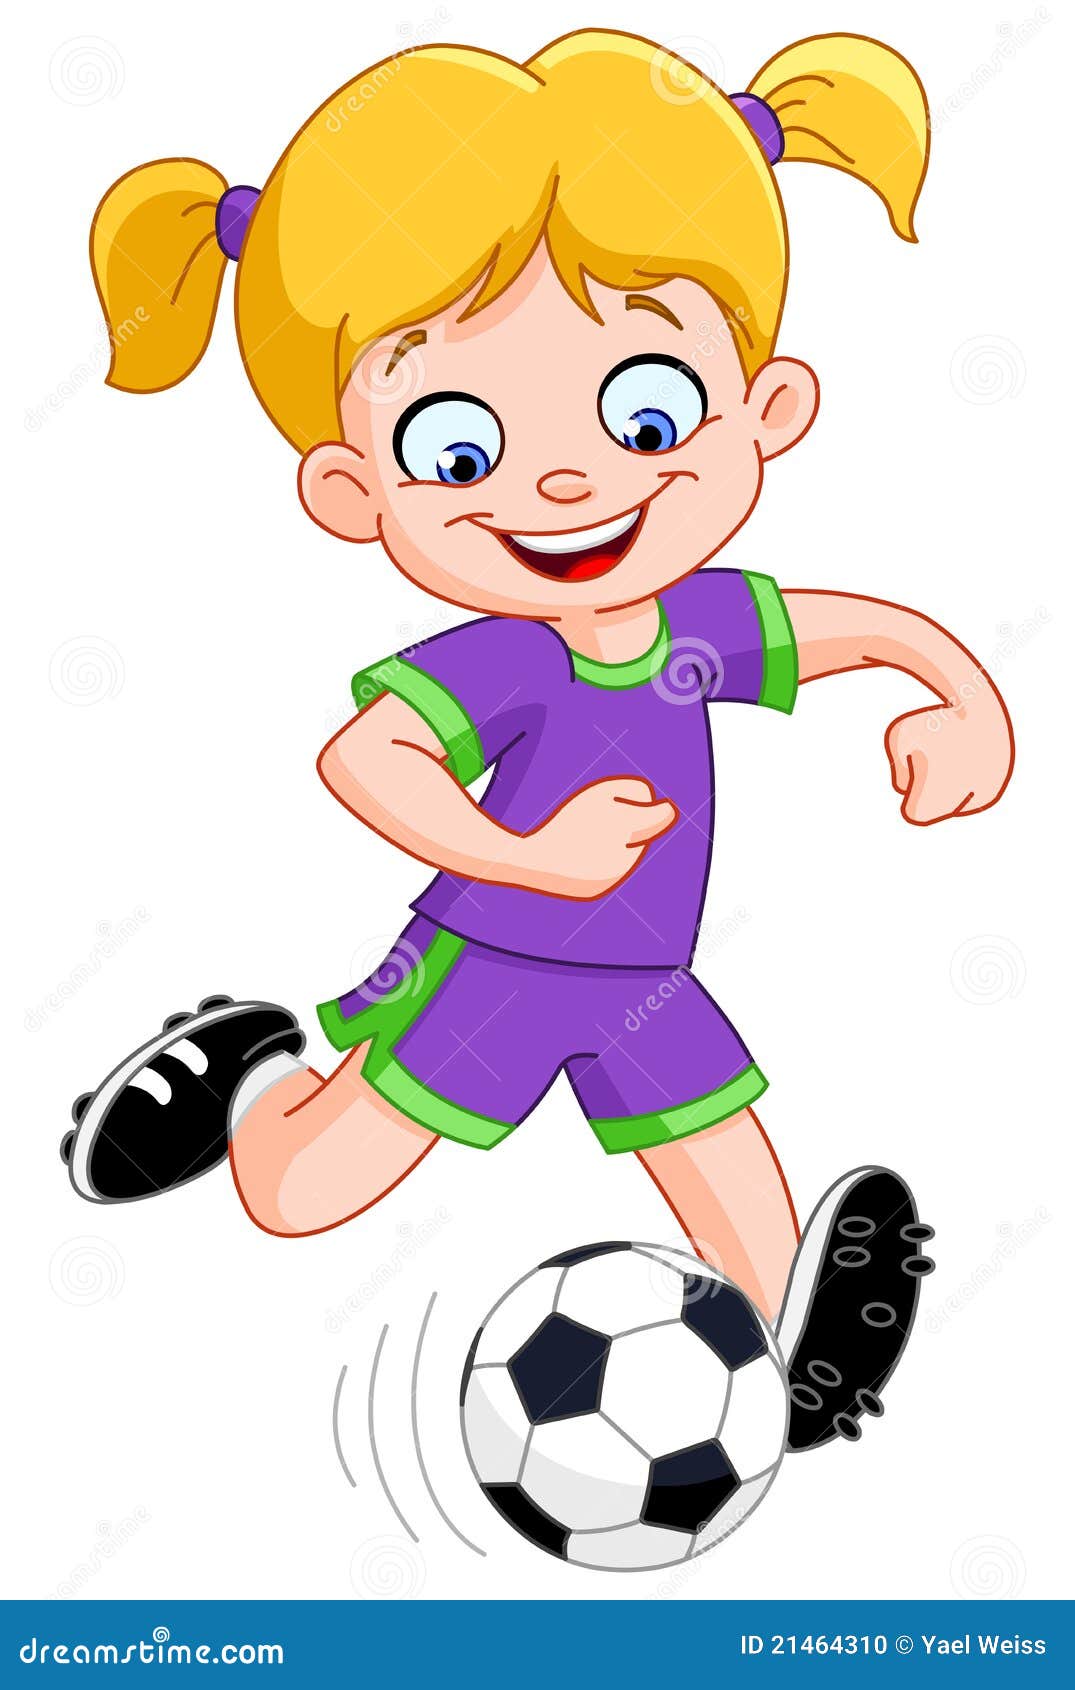 clipart girl playing soccer - photo #24